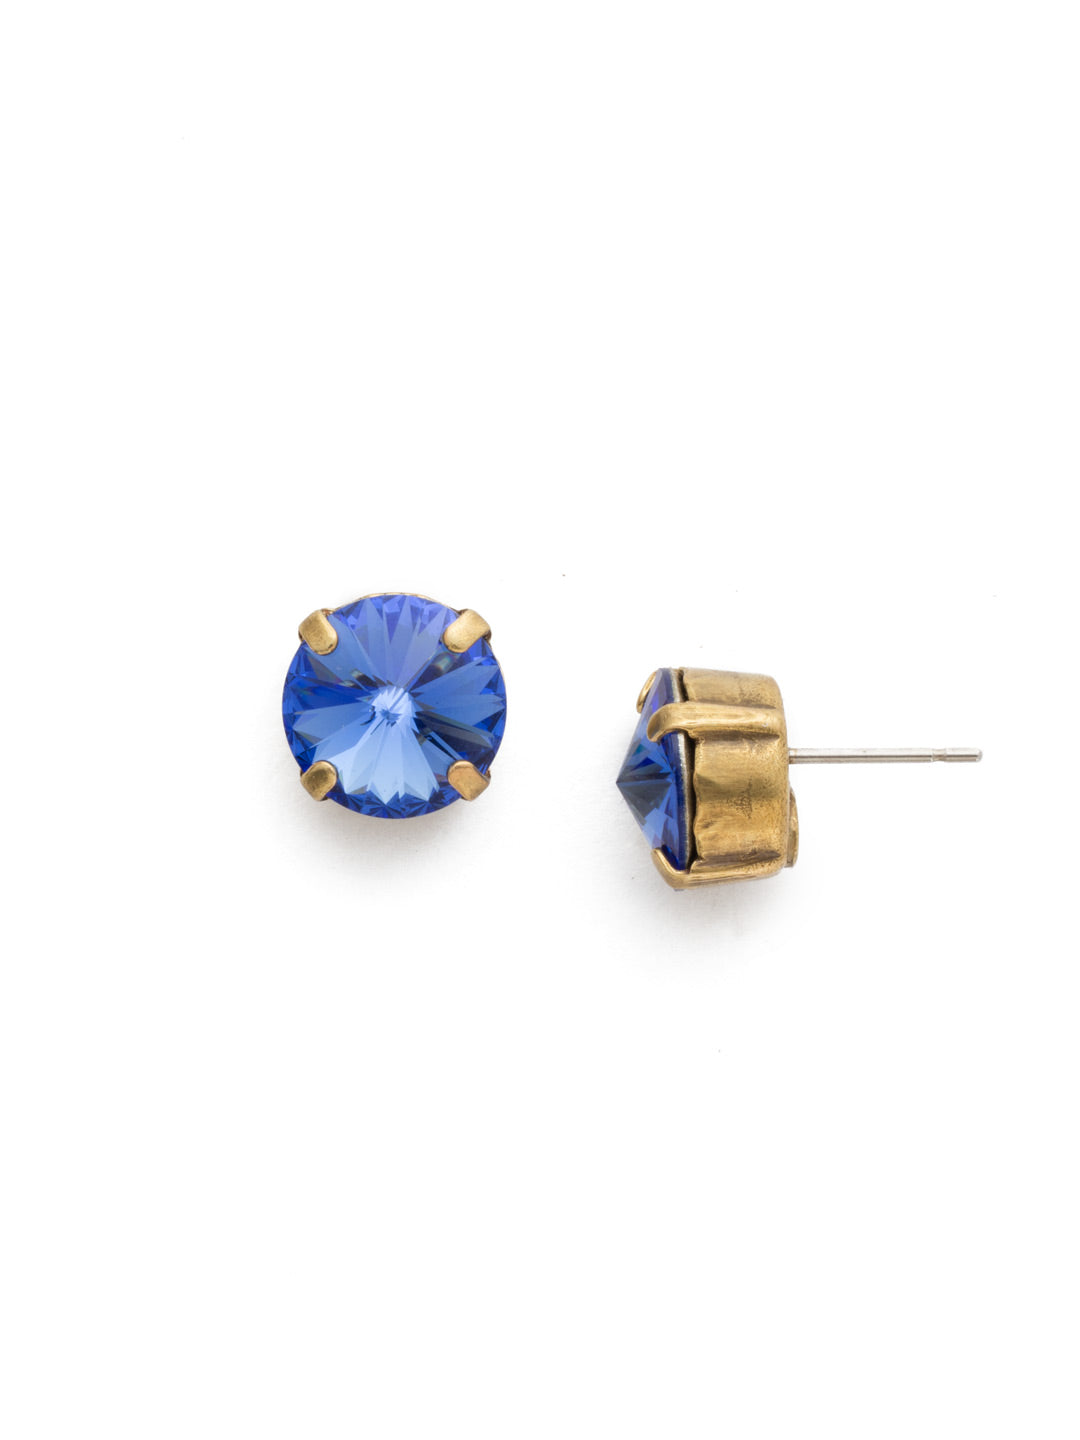 London Stud Earrings - ECM14AGSAP - <p>Everyone needs a great pair of studs. Add some classic sparkle to any occasion with these stud earrings. Need help picking a stud? <a href="https://www.sorrelli.com/blogs/sisterhood/round-stud-earrings-101-a-rundown-of-sizes-styles-and-sparkle">Check out our size guide!</a> From Sorrelli's Sapphire collection in our Antique Gold-tone finish.</p>